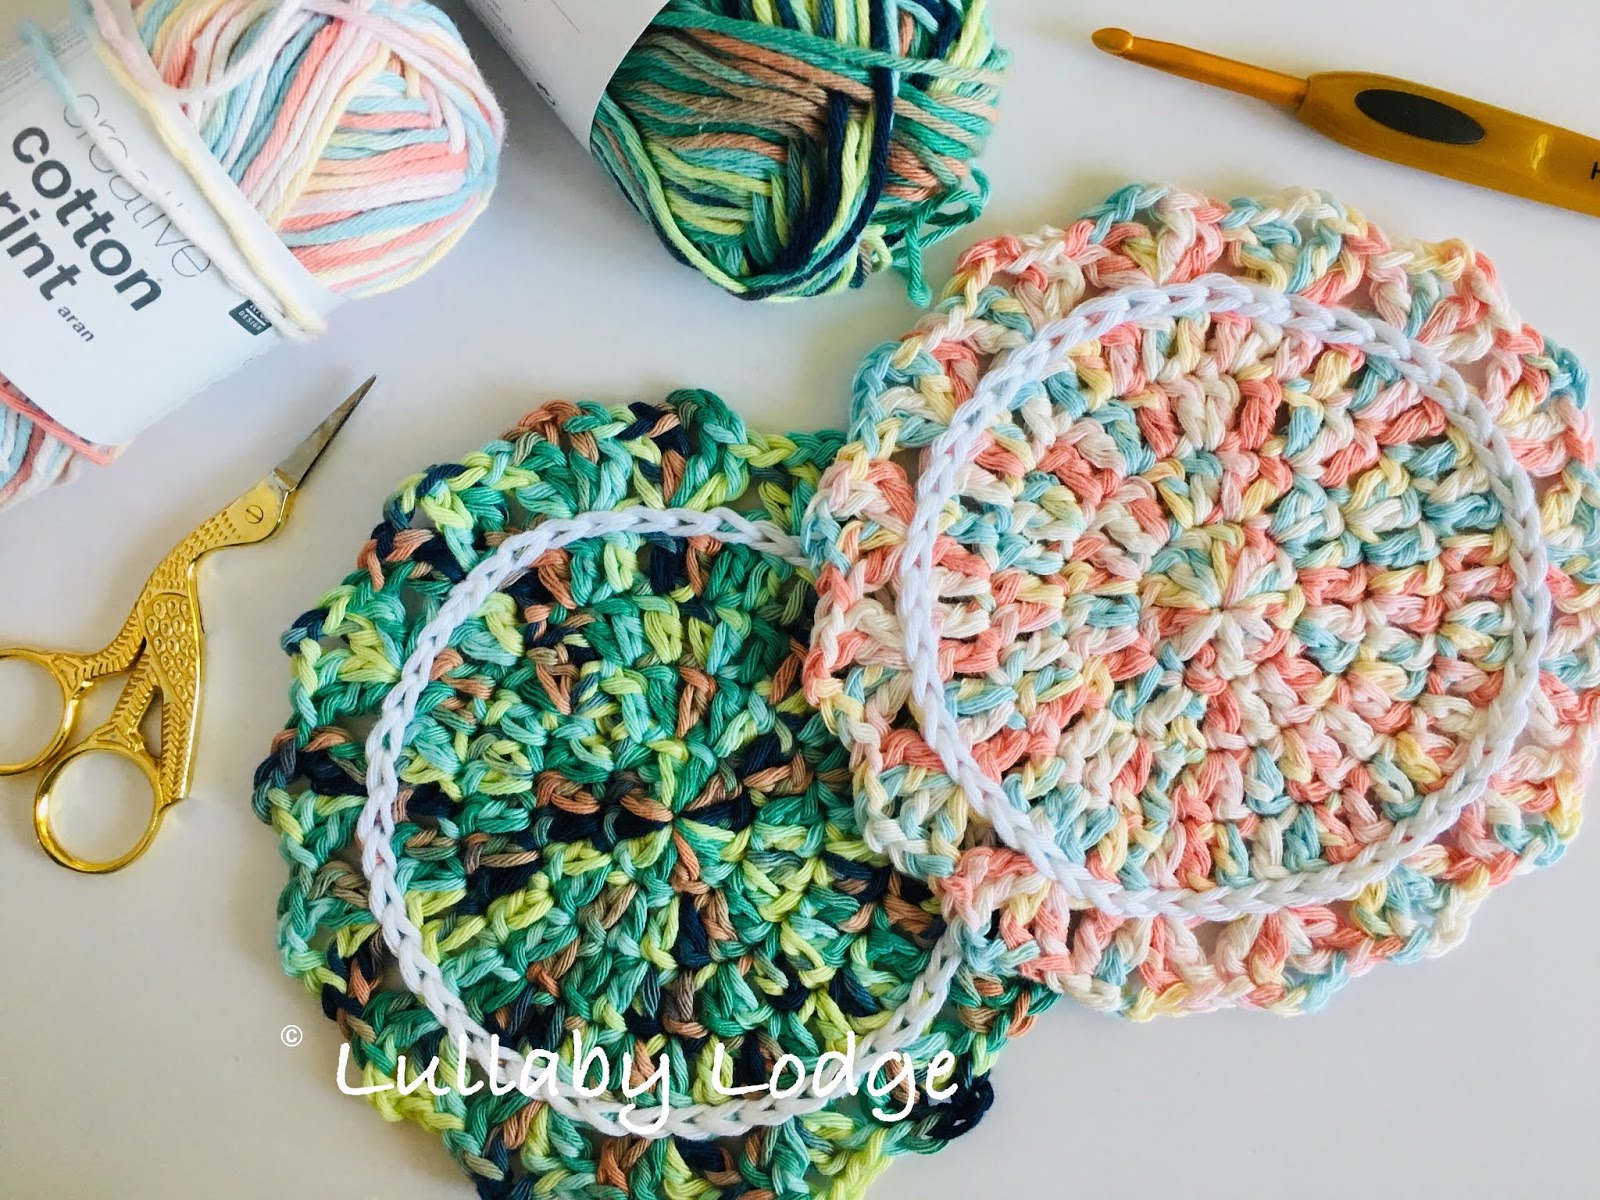 Lullaby Lodge: Ombre Crochet Coasters - Our Happy CAL Place, weekly and  monthly crochet along group on Ravelry